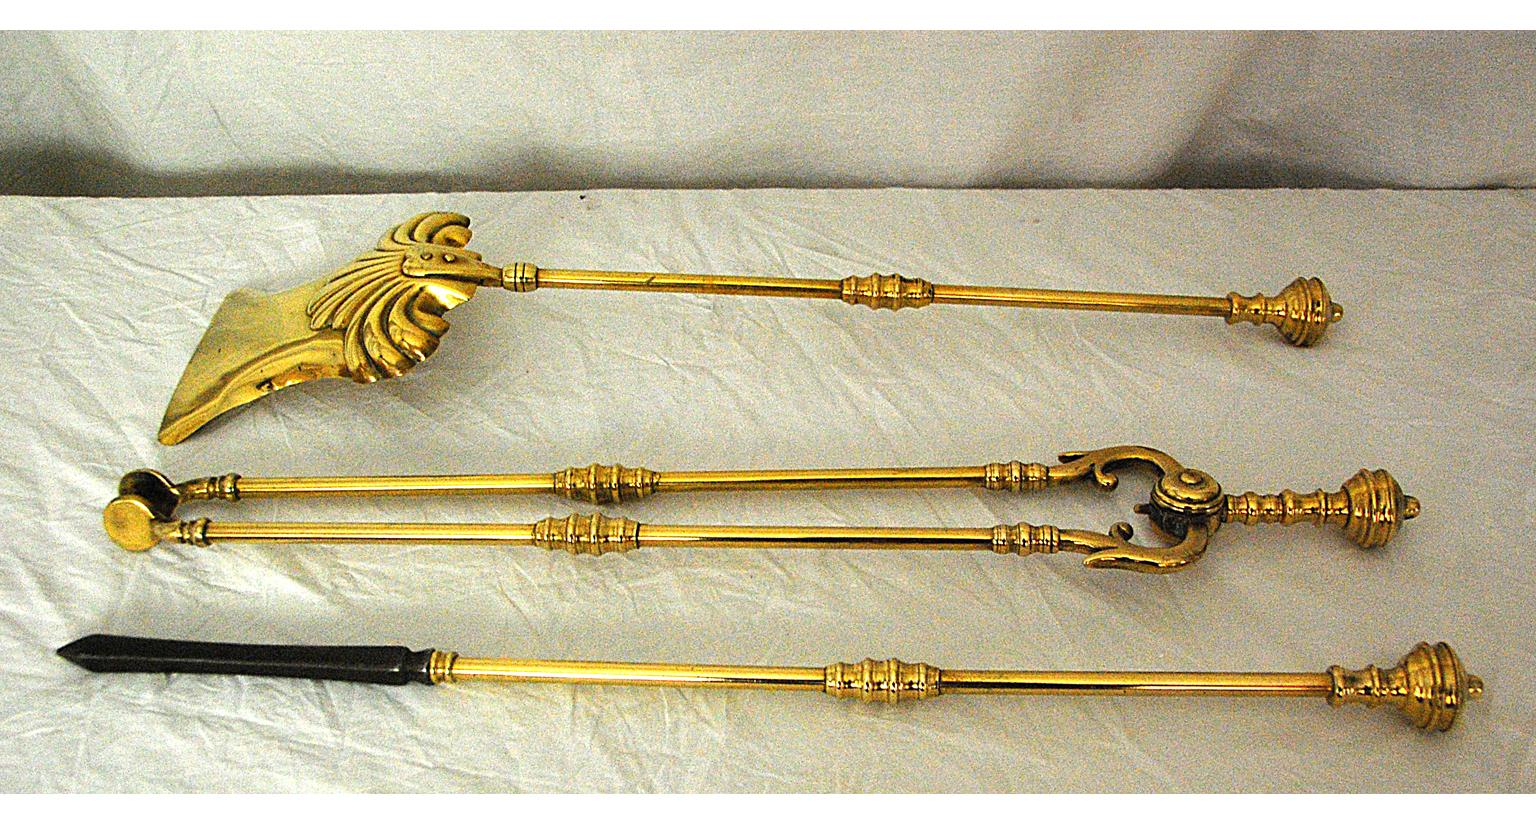 English Victorian period set of three brass firetools, including the shovel, tongs and poker. The poker has a cast iron end for poking hot coals. The shovel is registry dated 1895 (generally speaking only one tool of a set bears the registry date).